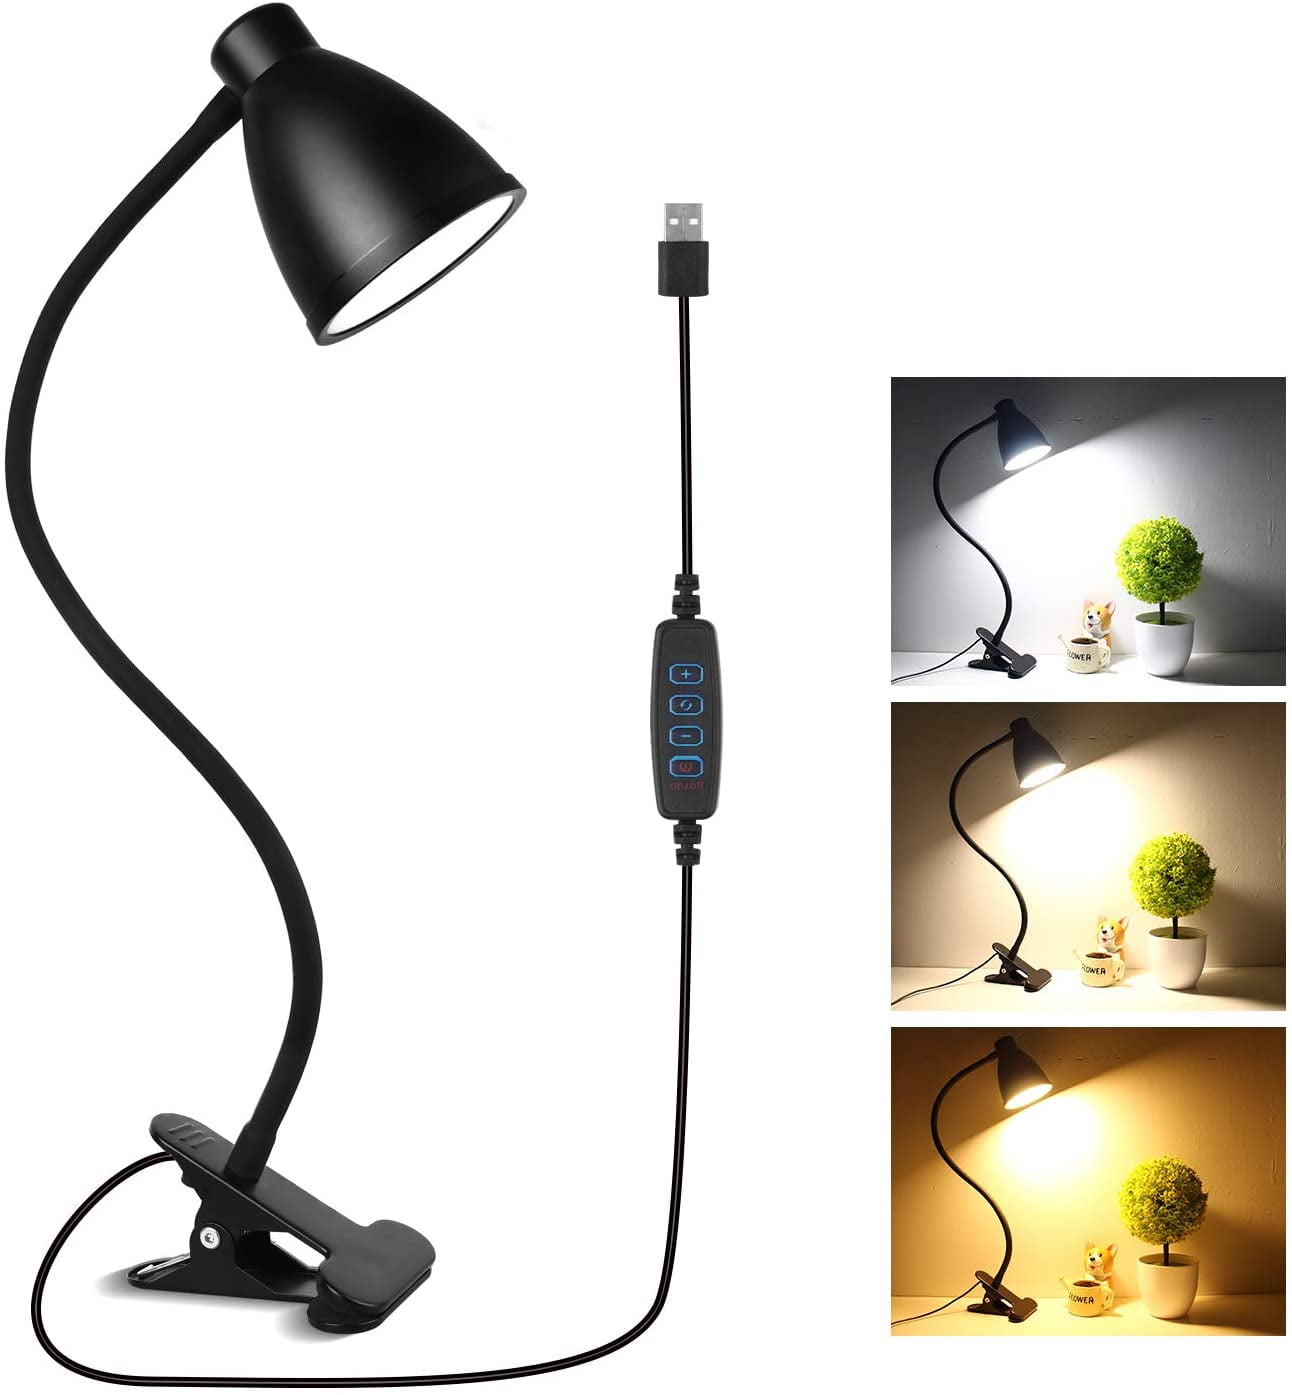 10 Dimmable Brightness 3 Light Modes Reading Light Table Desk Lamp USB Plug-in Powered Auto Off Clip on Light Silver 